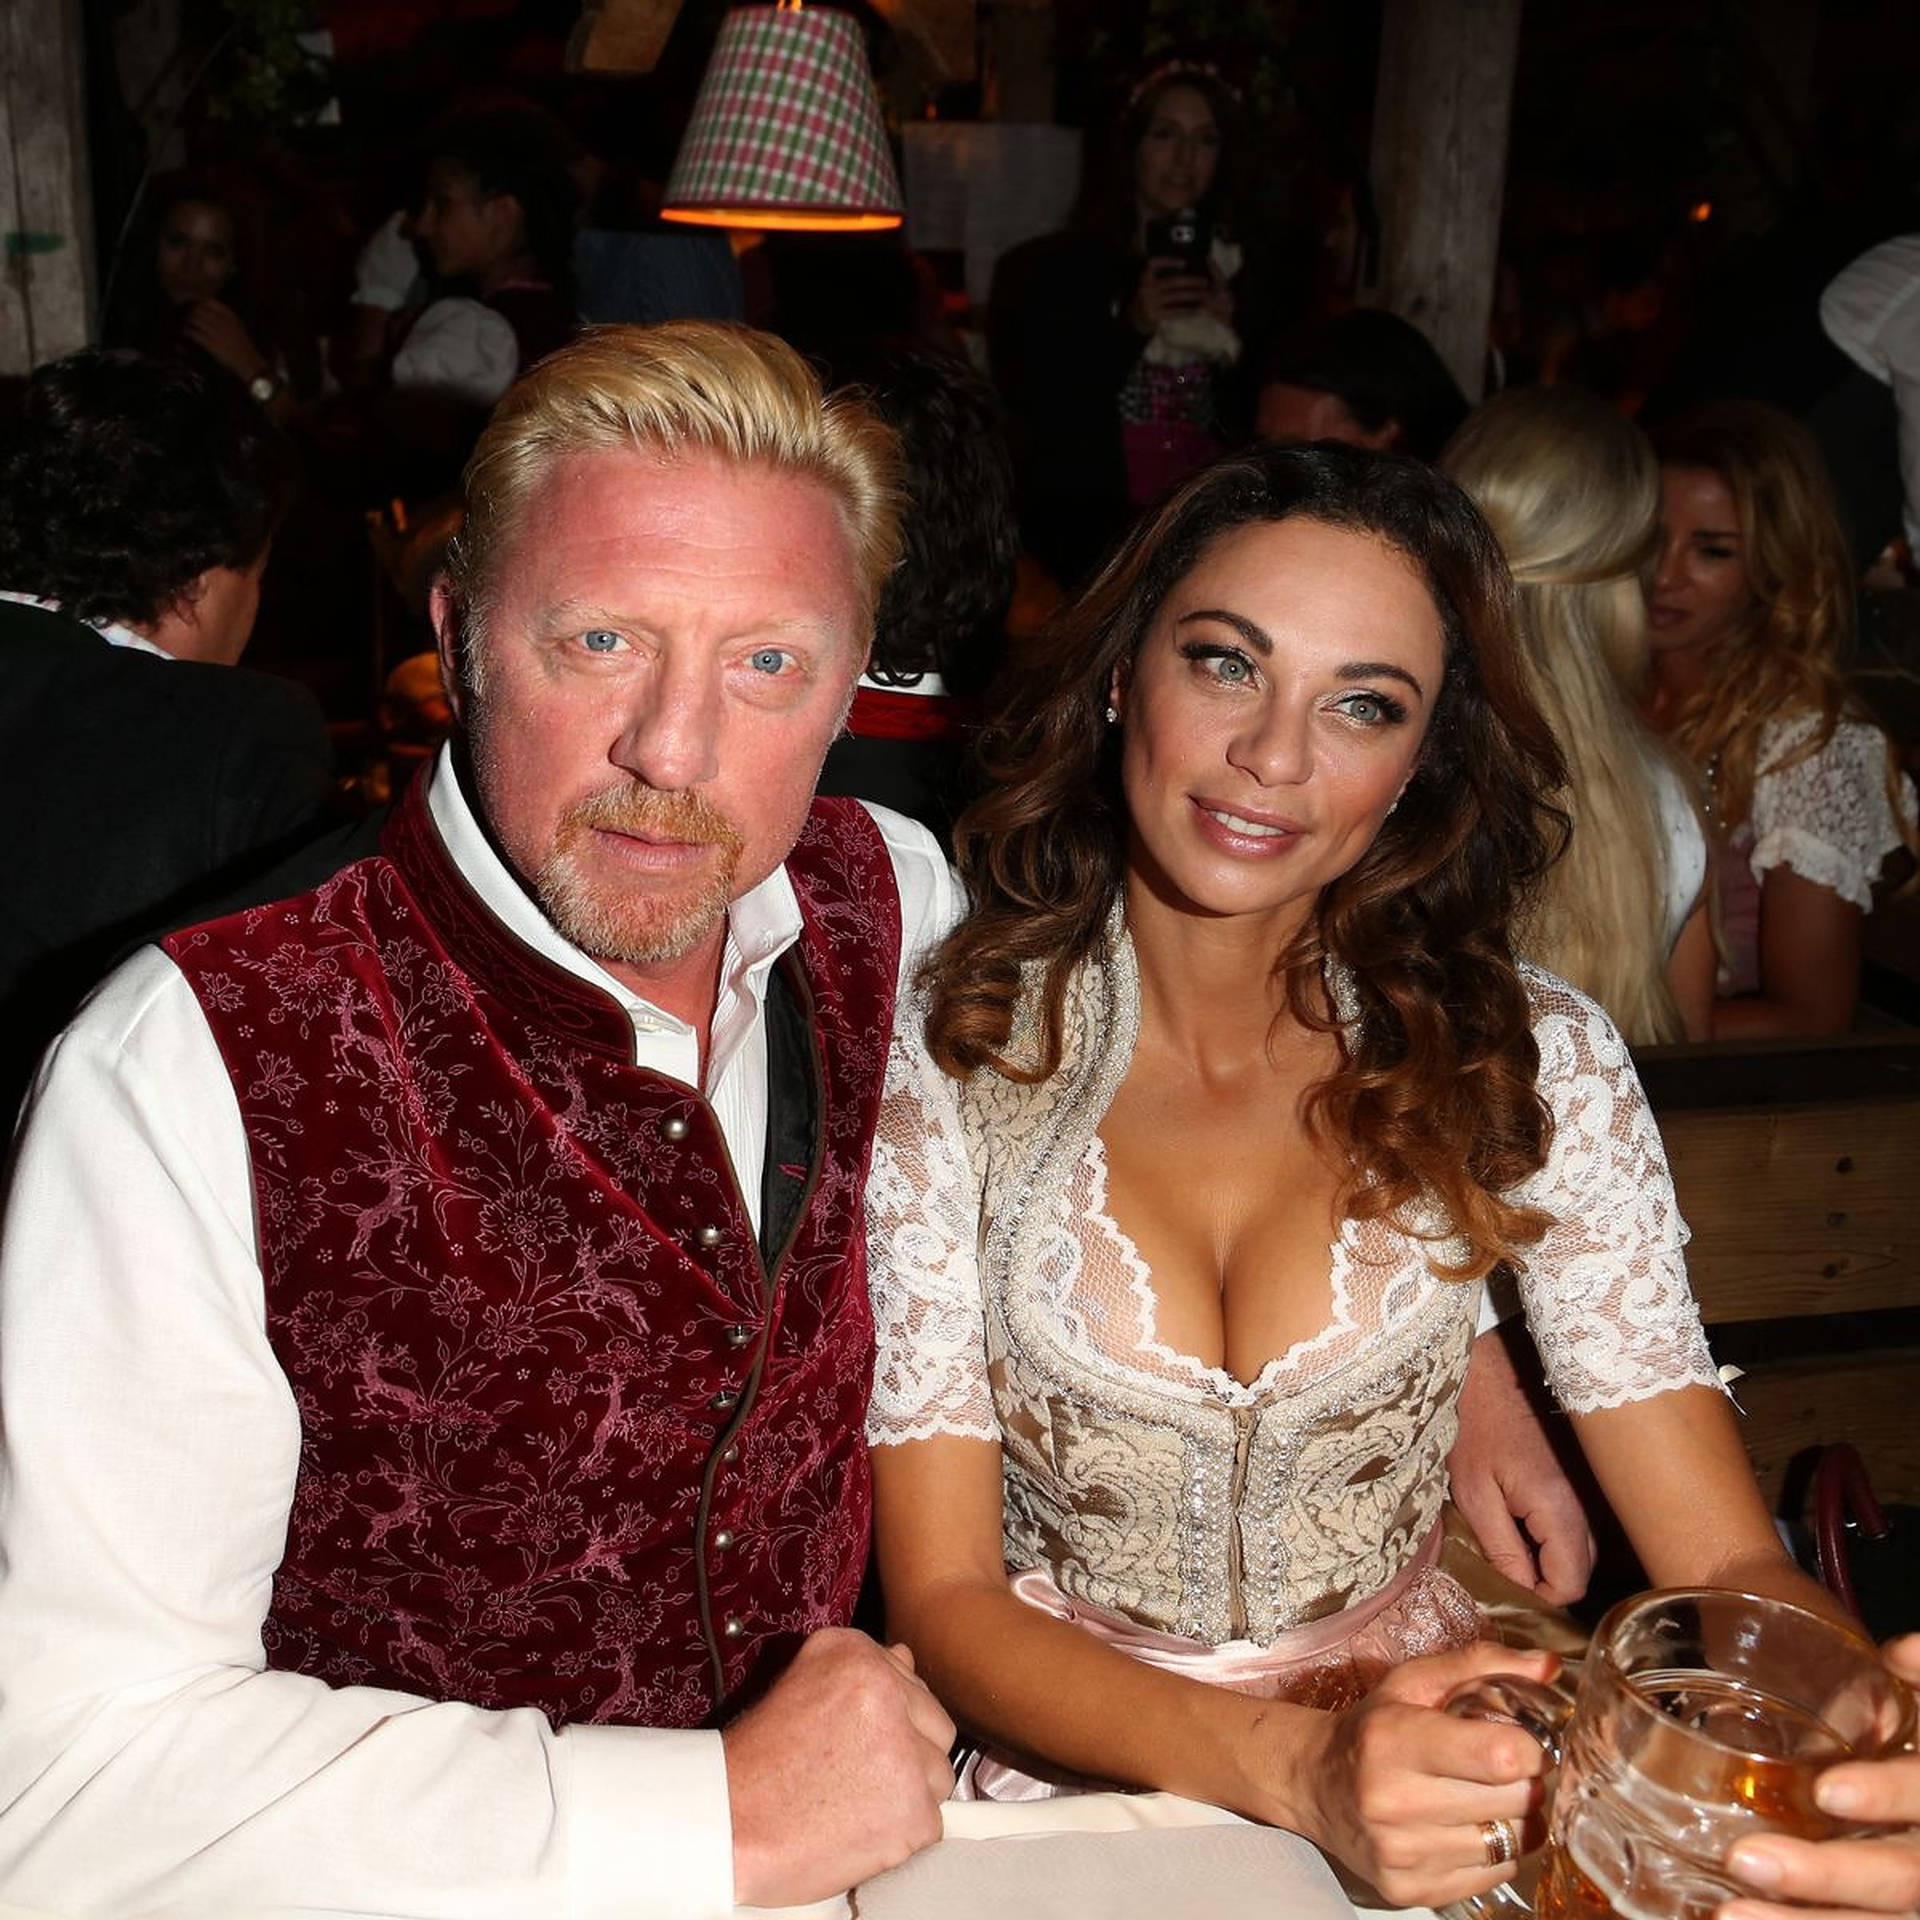 Boris Becker With His Wife Background